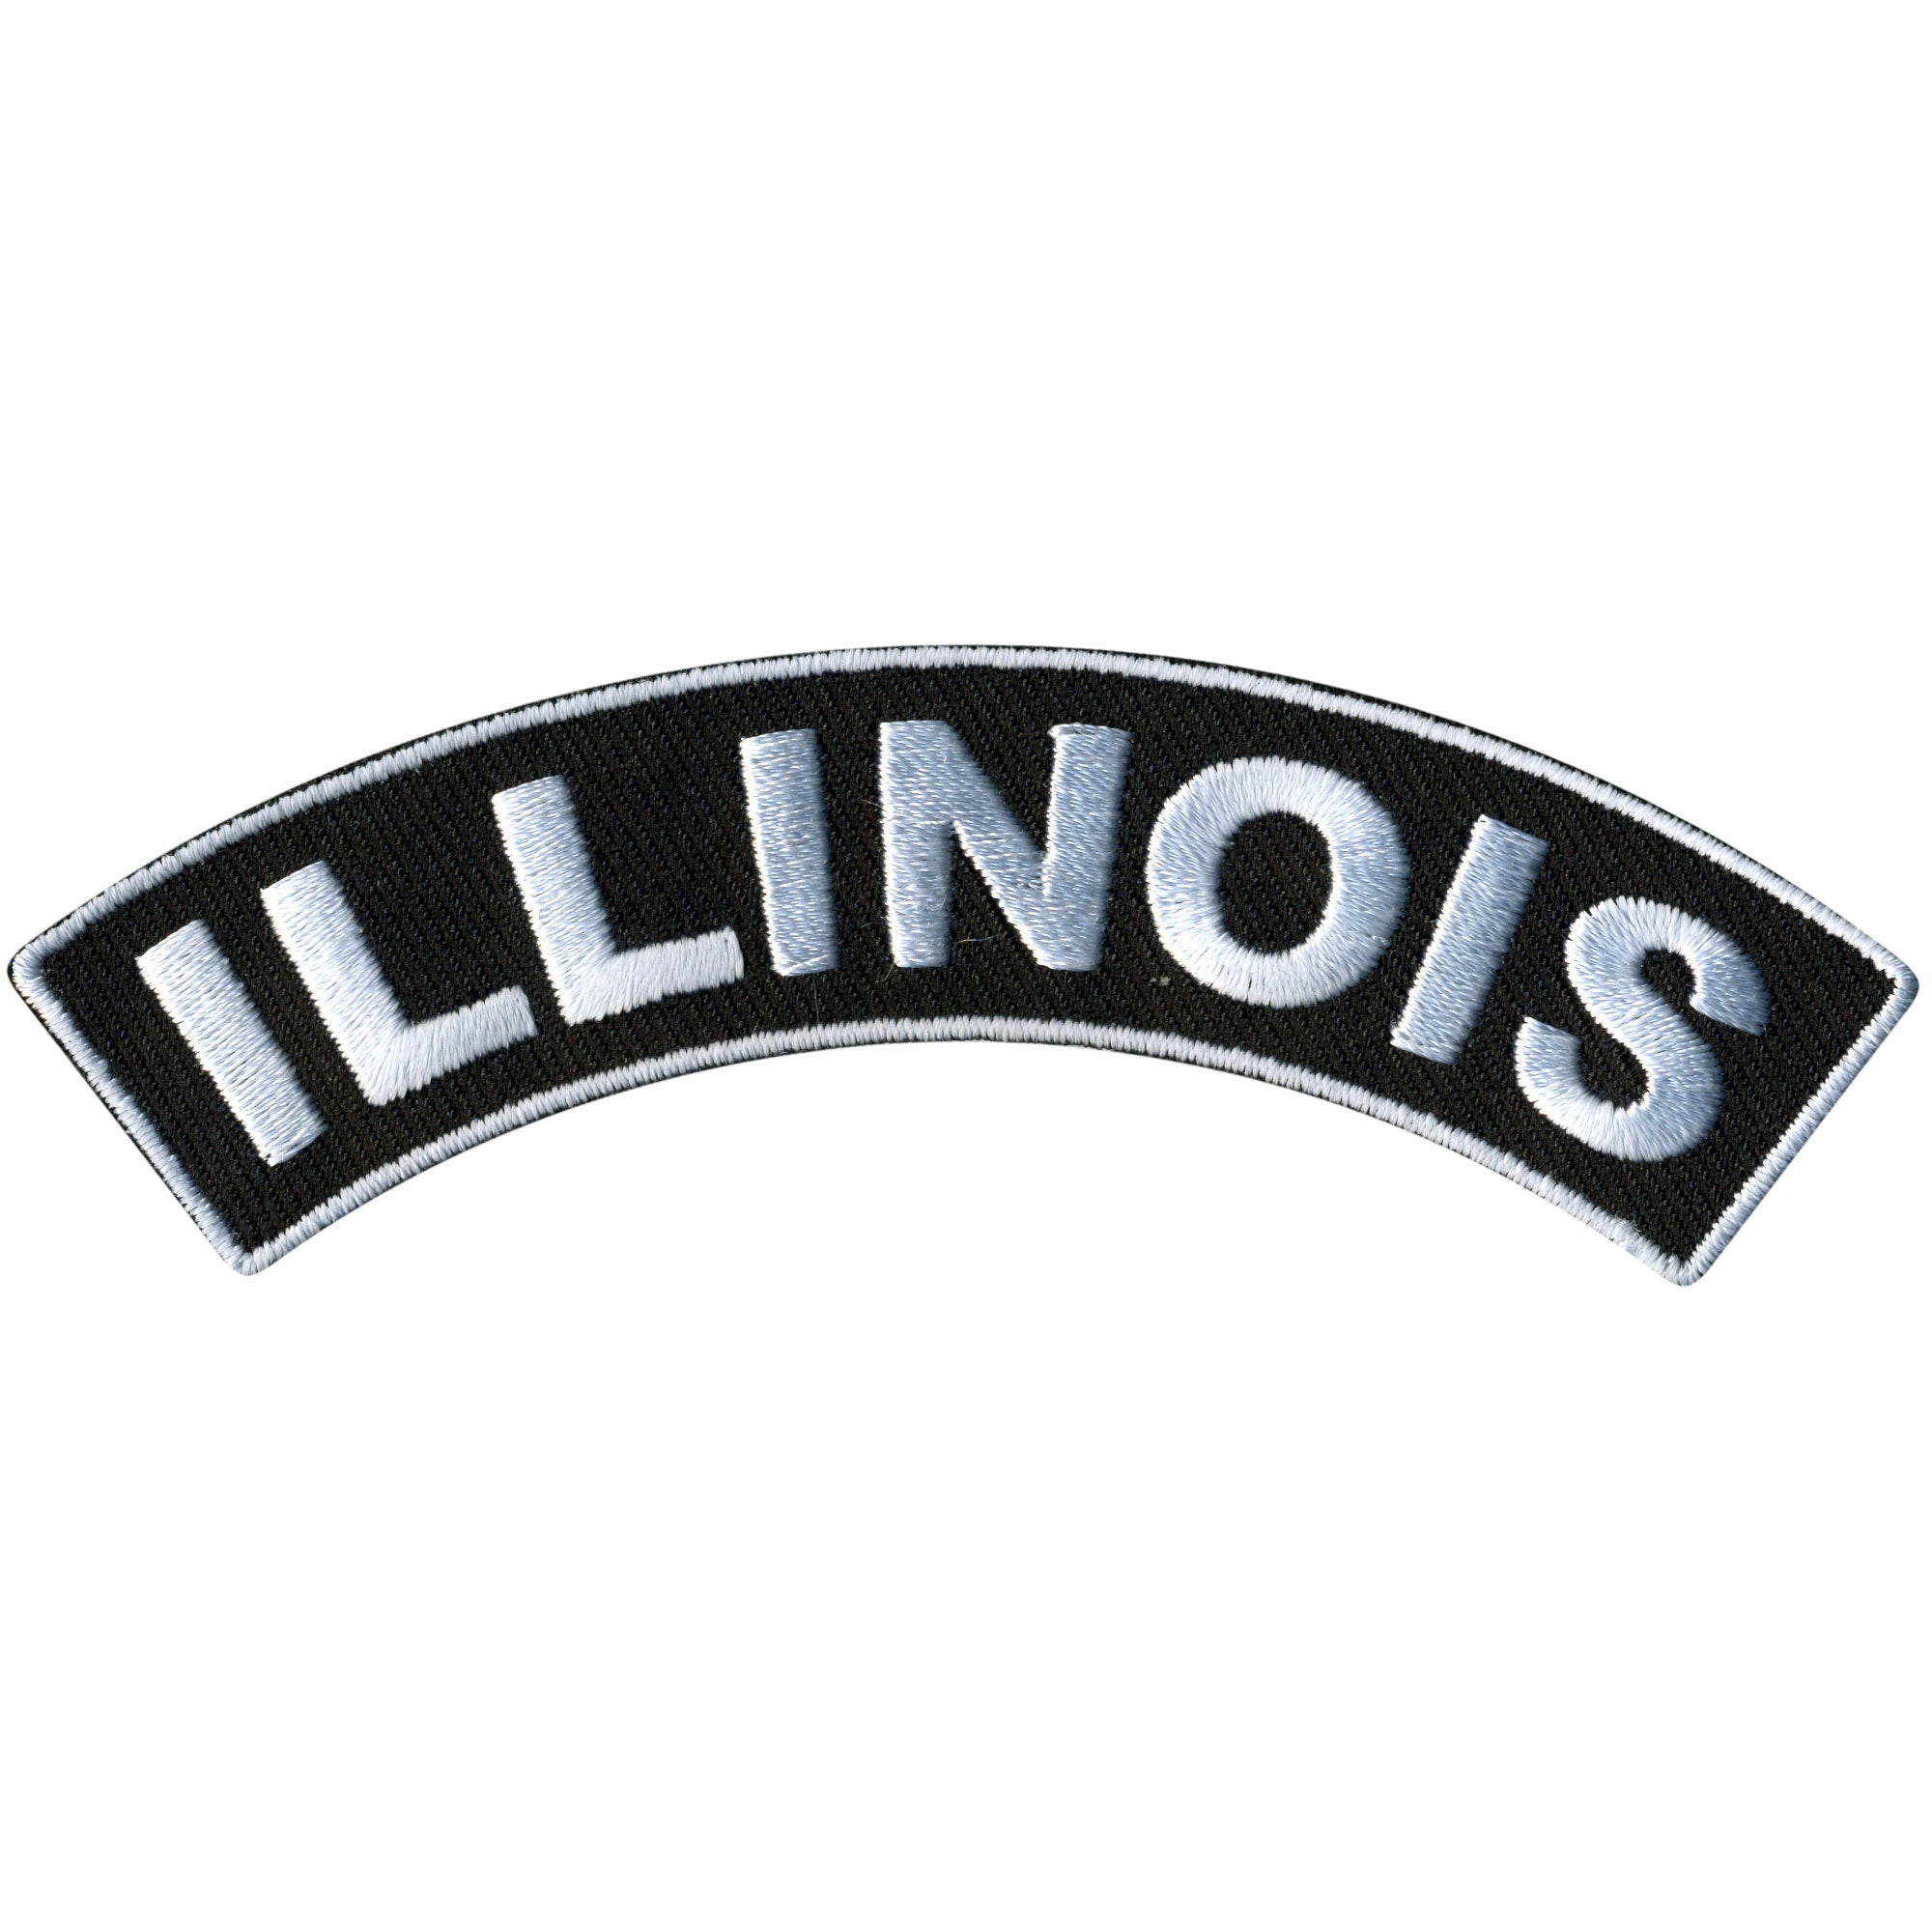 Hot Leathers Illinois 4” X 1” Top Rocker Patch